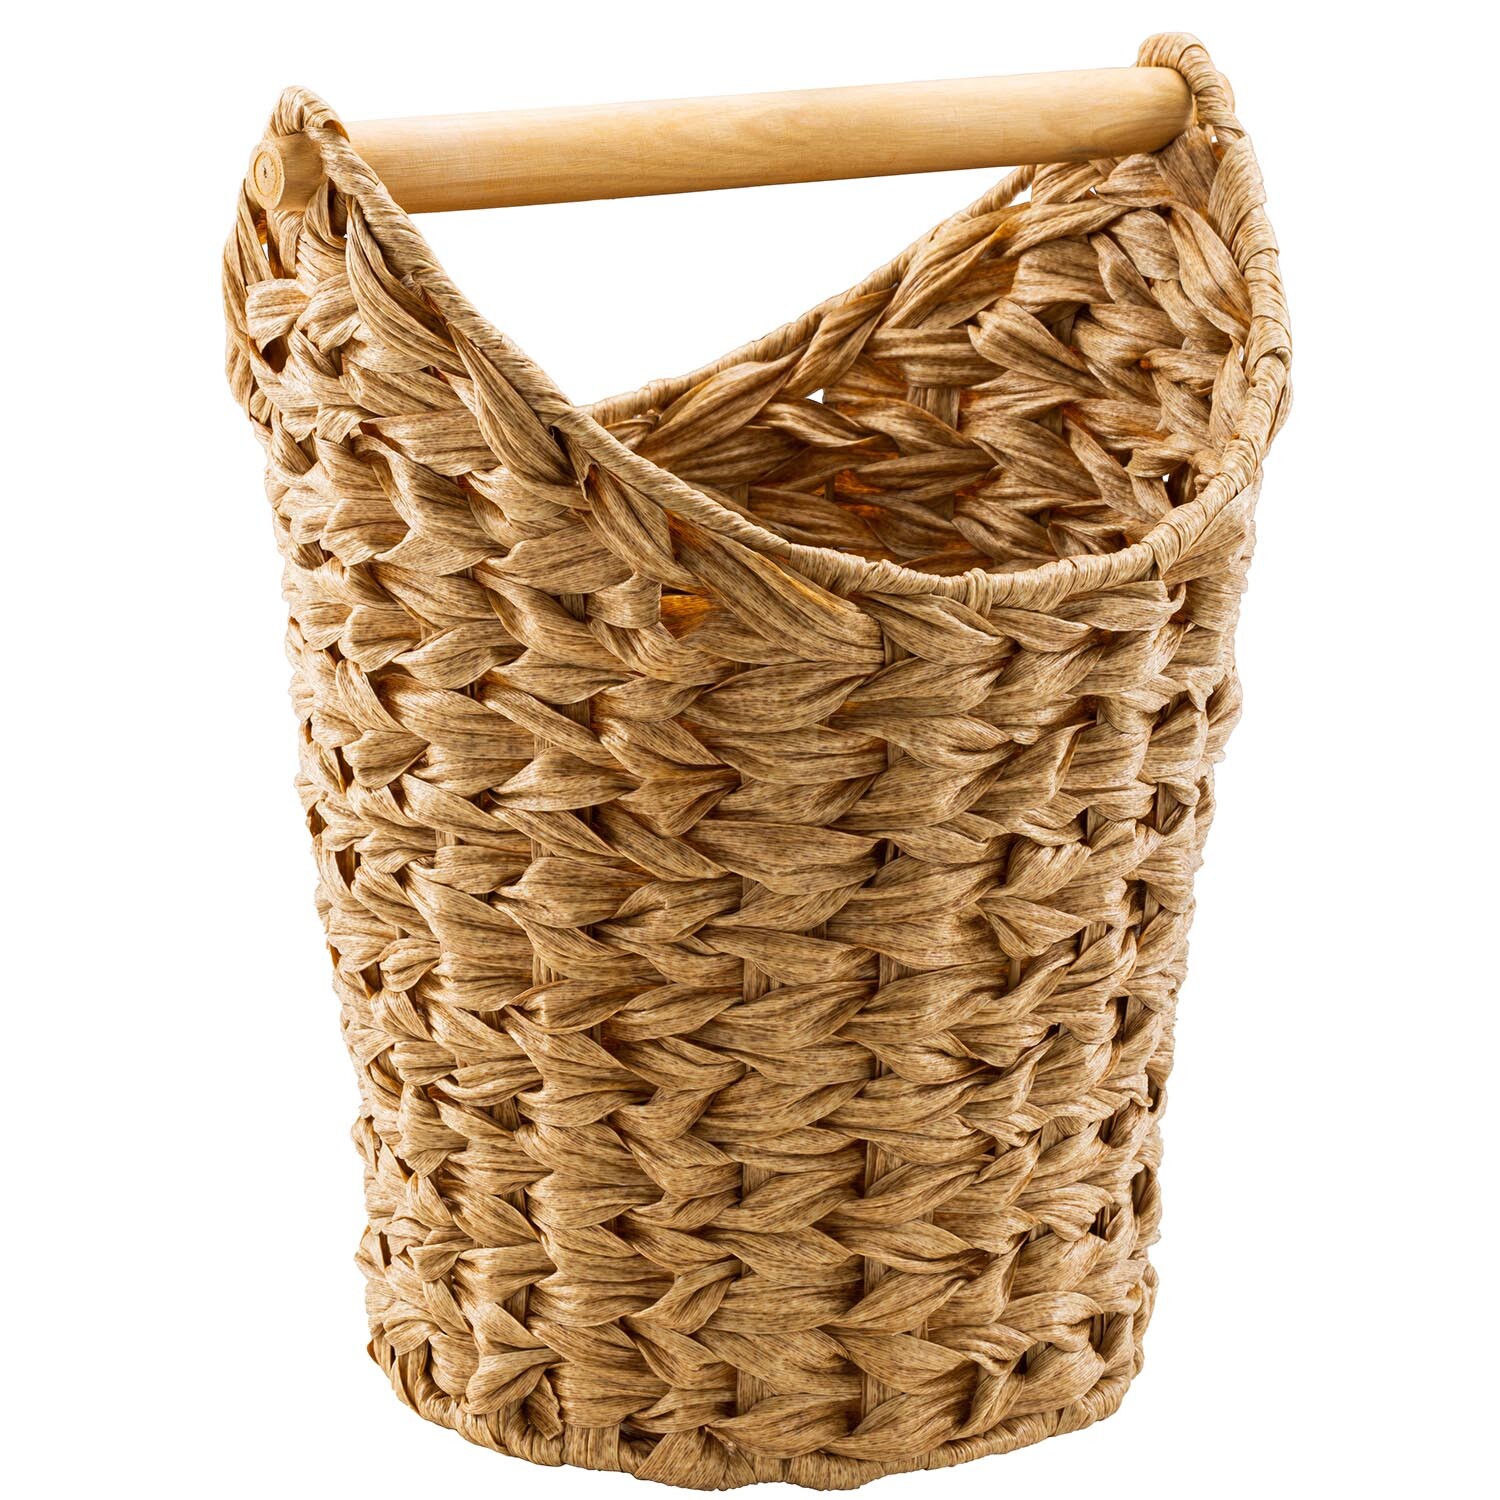 Wicker Toilet Roll Basket - Natural Image 2